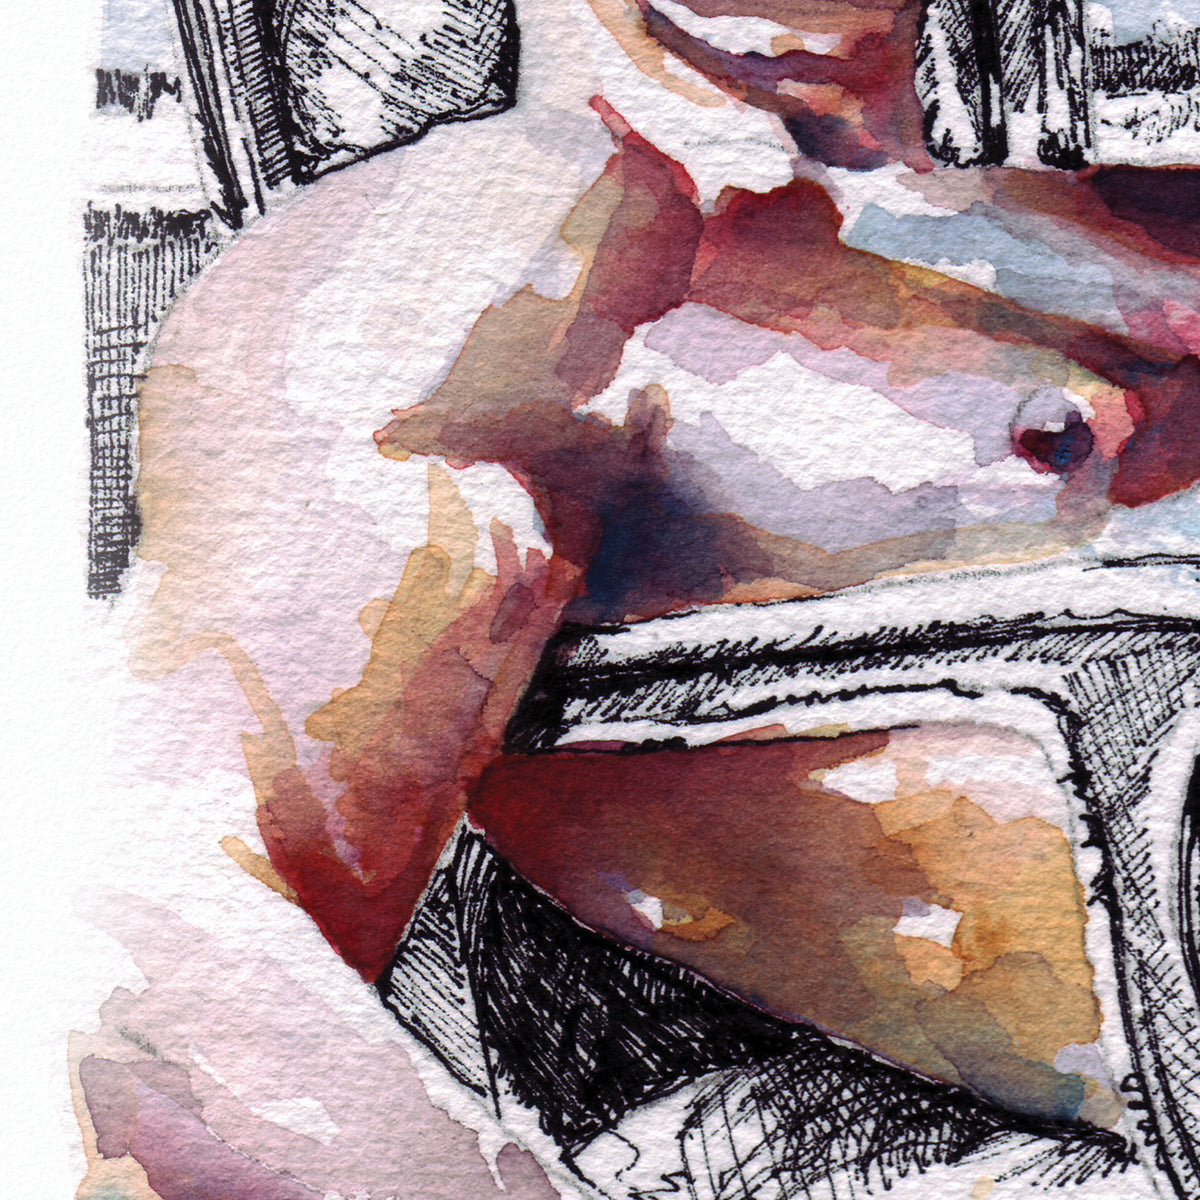 Older Man Seated: Male Nude Contemplative Pose in Watercolor & Ink - Giclee Art Print